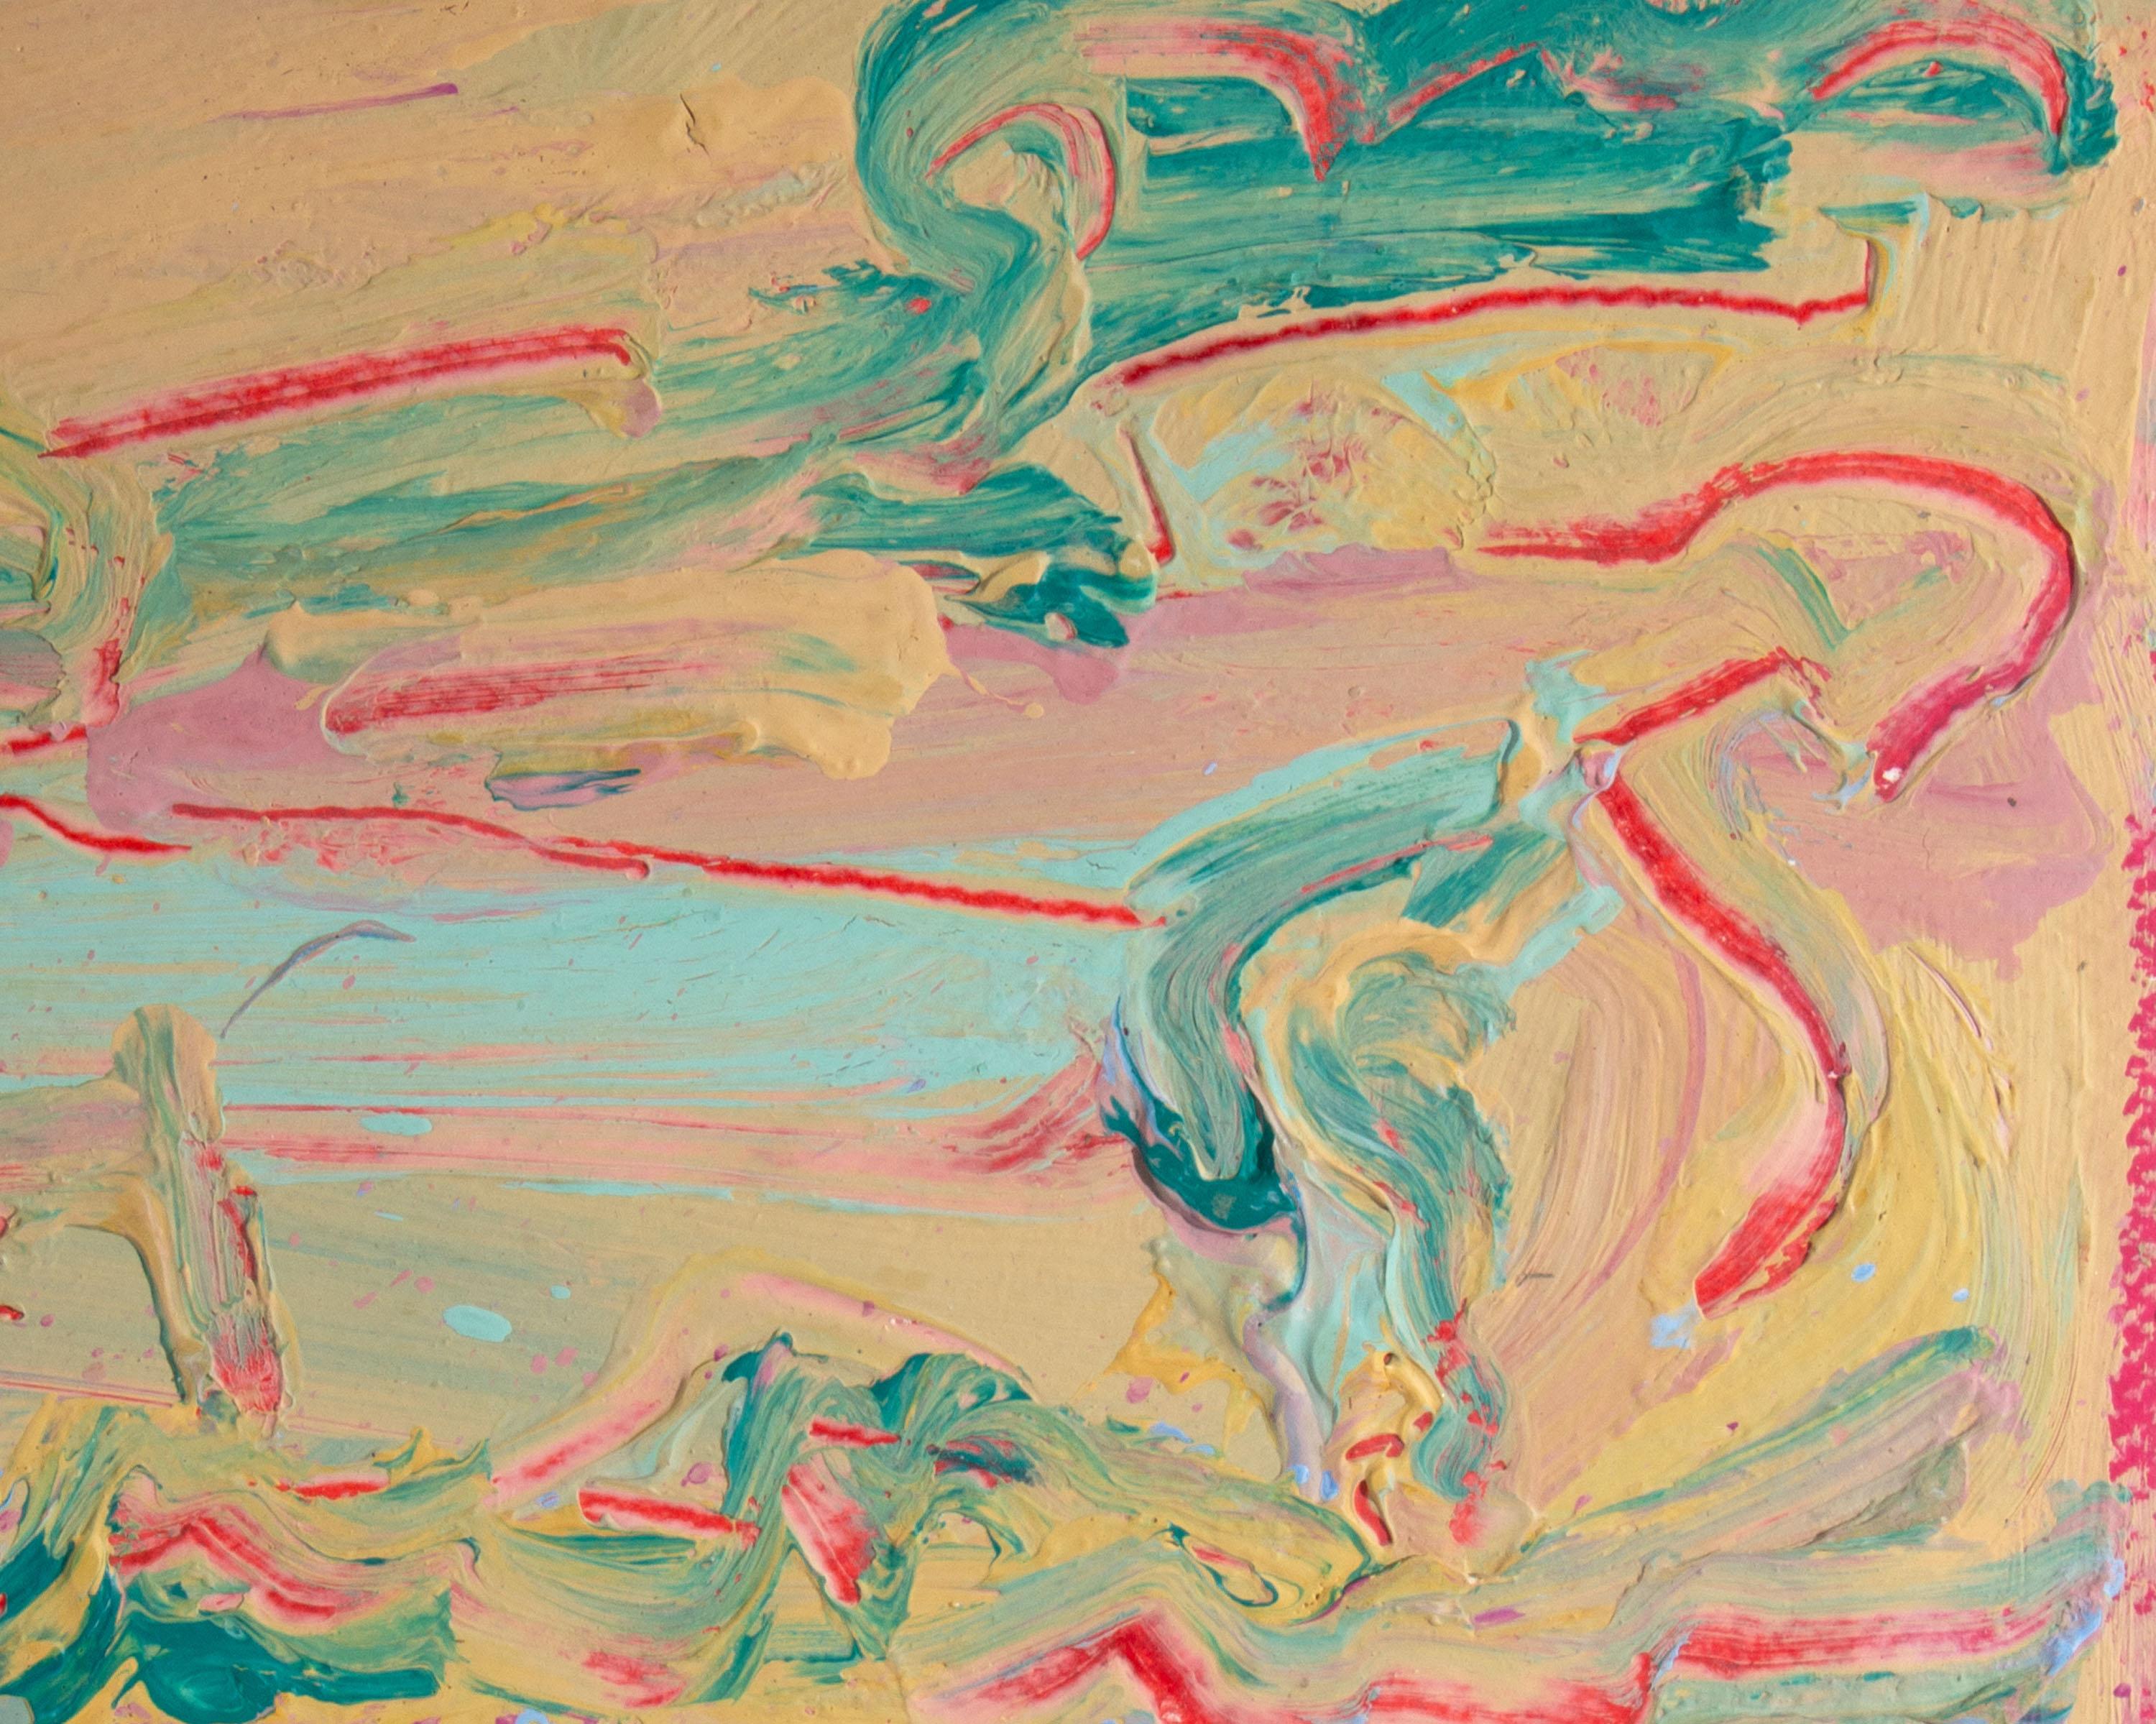 Hand-Painted Harry Hilson Signed 1980s “Sky above Fire below” Abstract Landscape Acrylic Pain For Sale